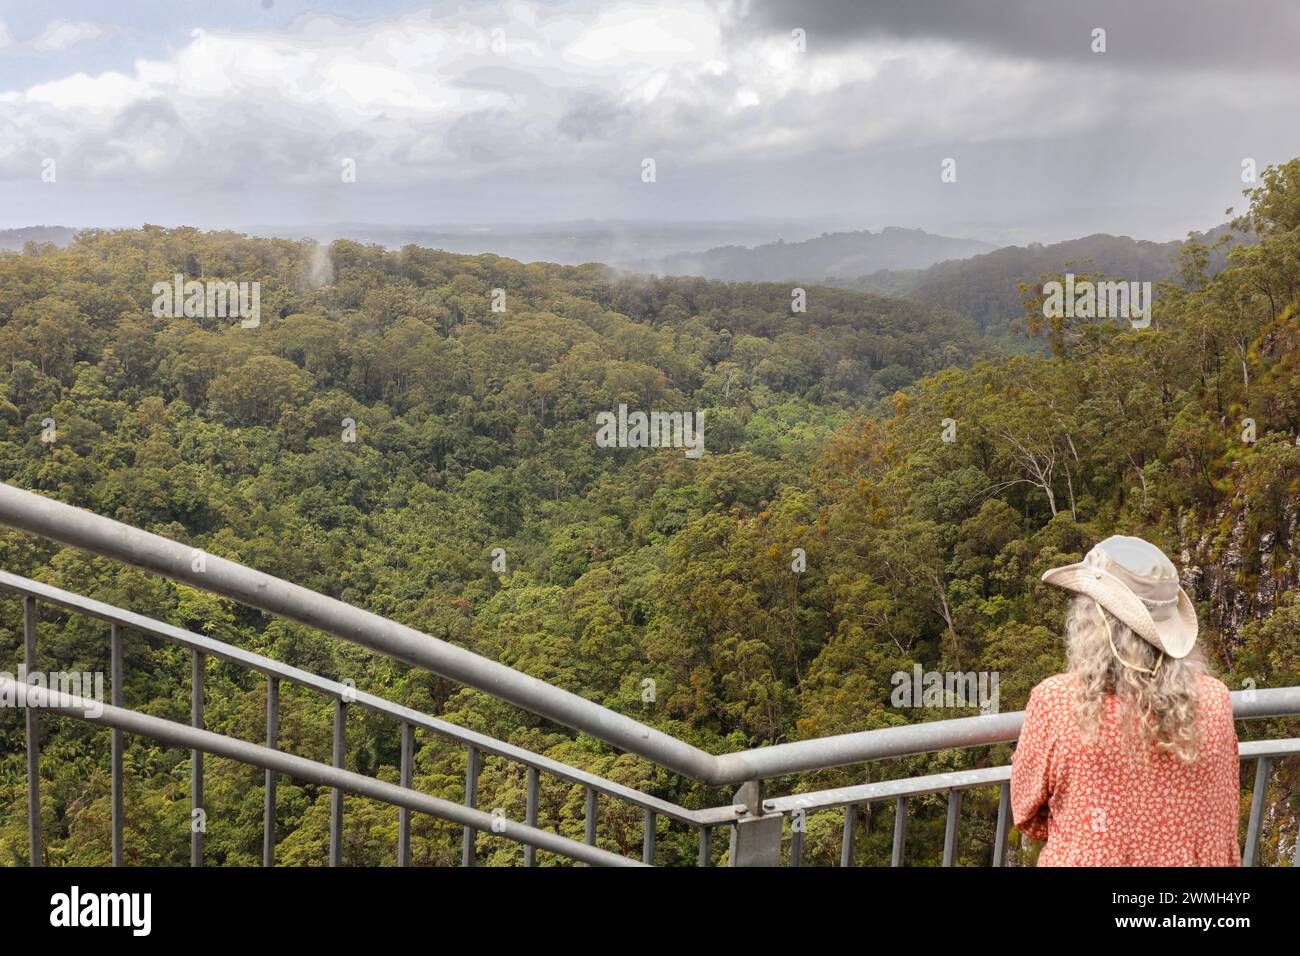 A woman, on a round-the-world adventure tour, stands on the Minyon Falls lookout in Nightcap National Park near Alstonville, NSW, Australia. Stock Photo